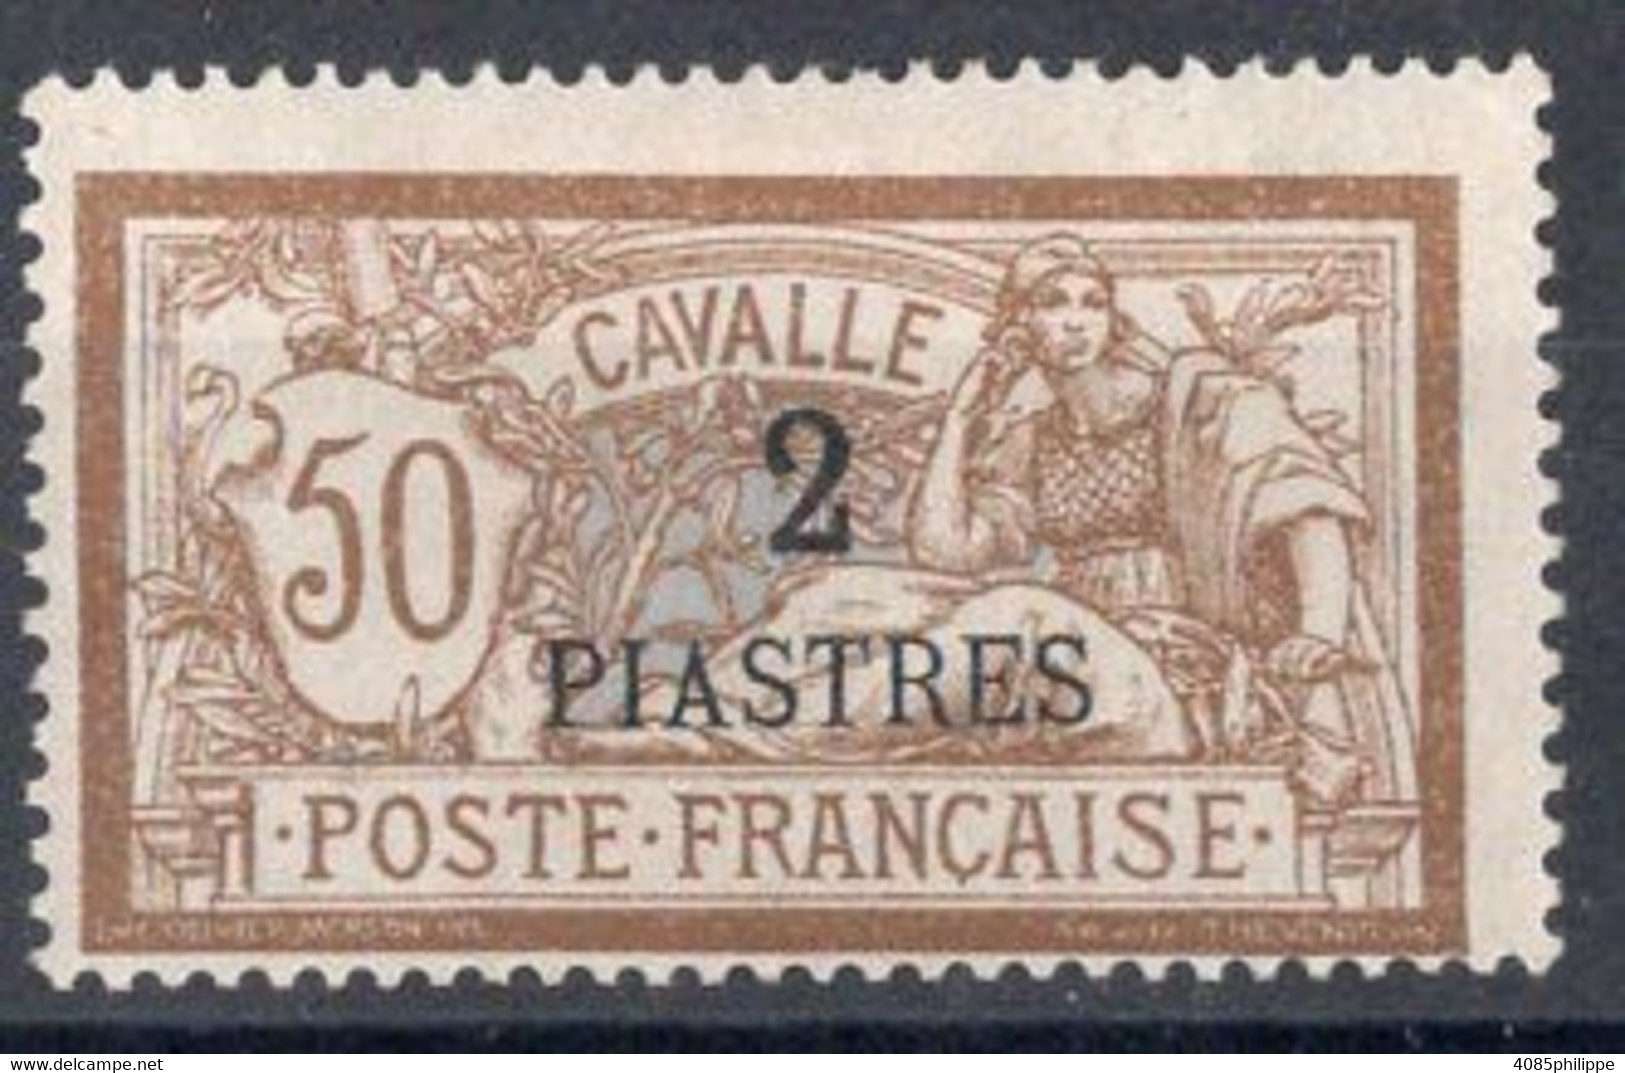 Cavalle Timbre-poste N°14*  Neuf Charnière Cote : 16€00 - Unused Stamps